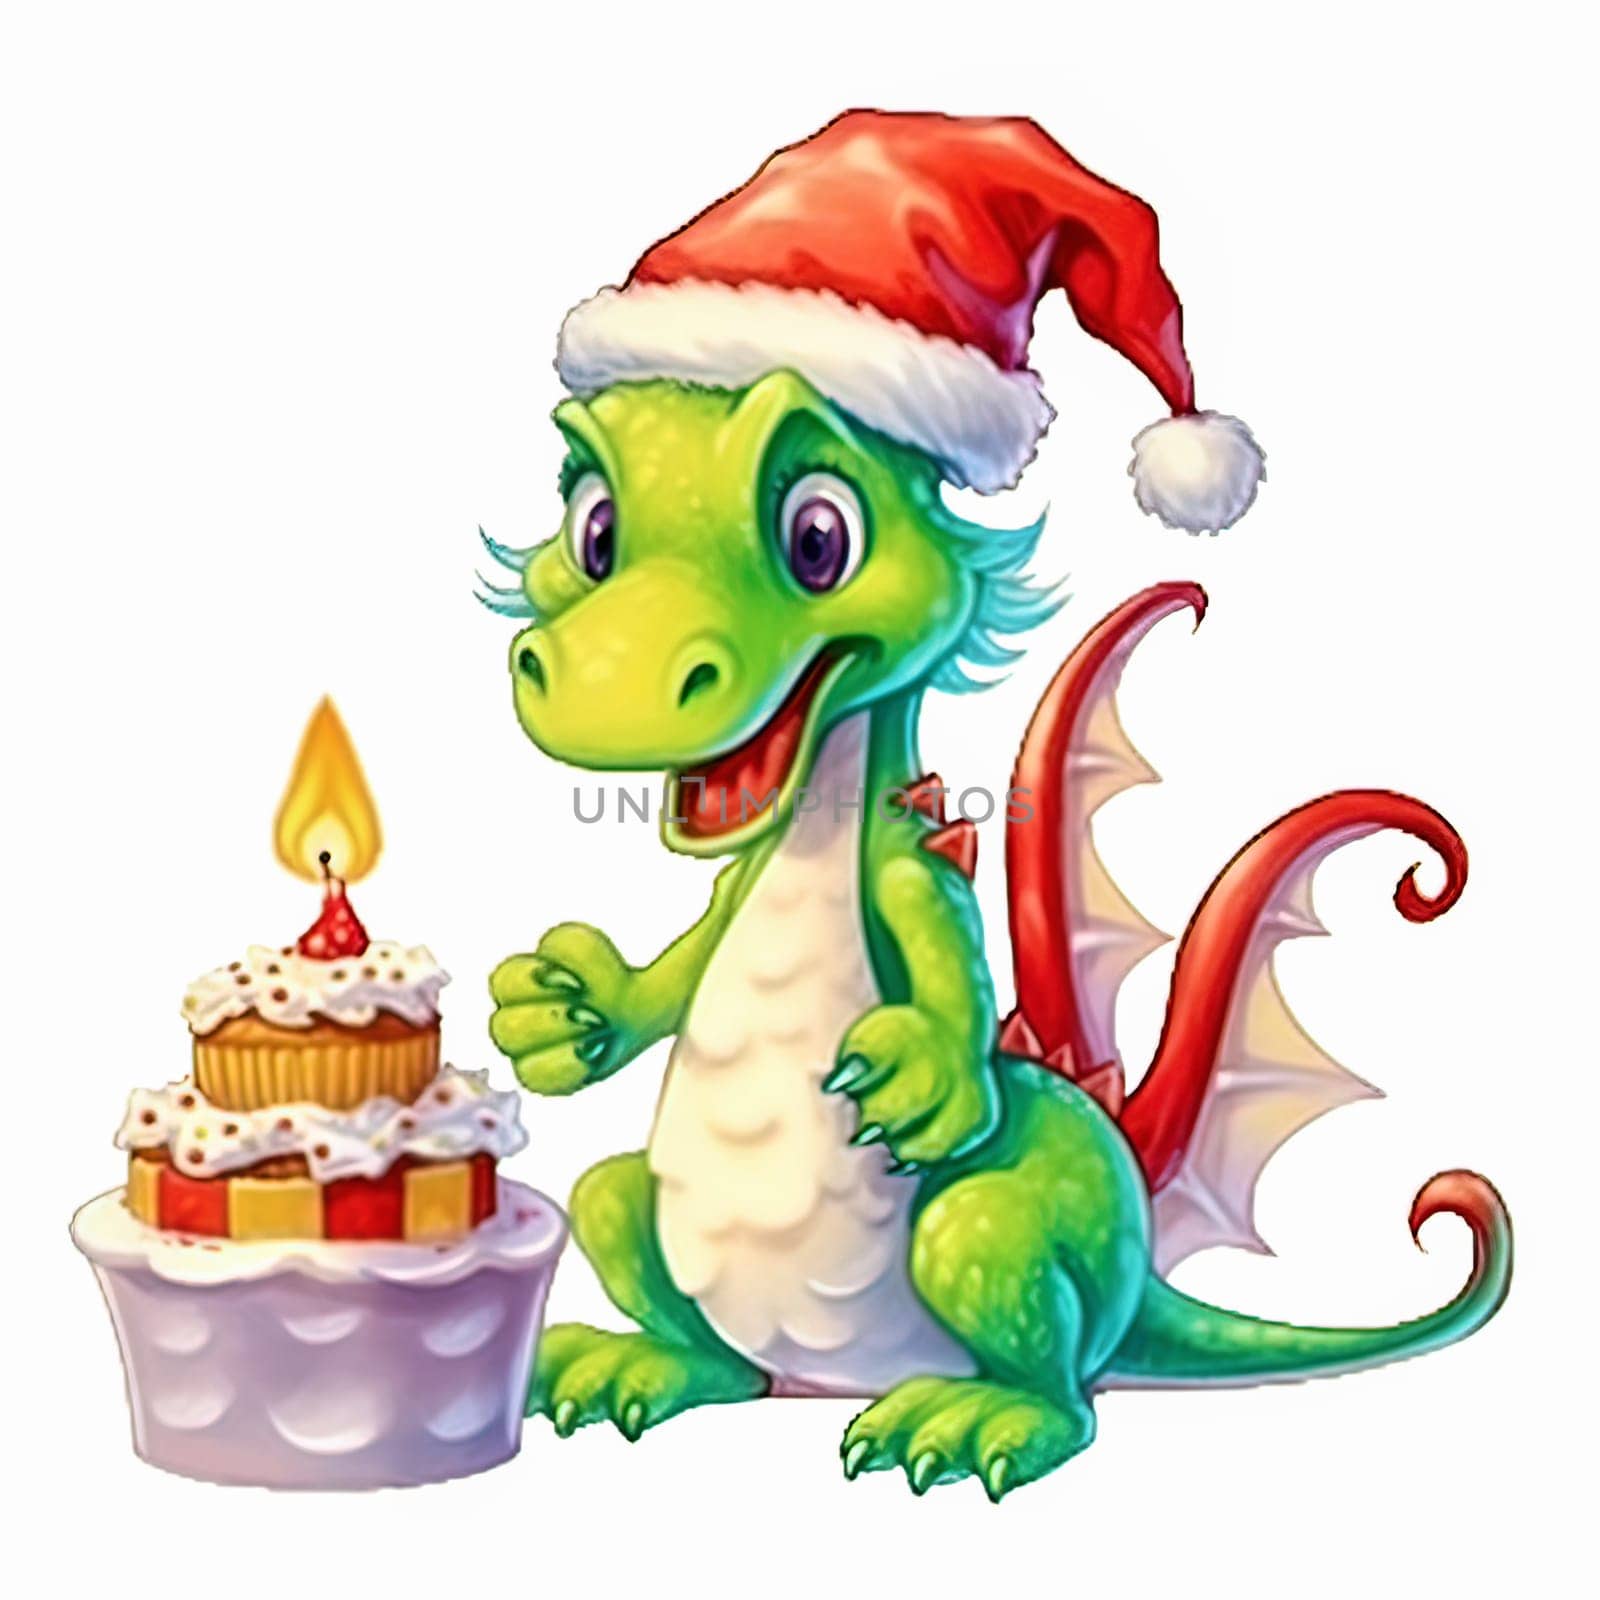 Illustration of a small green dragon in a red cap with a New Year's cake on a white background. Year of the dragon. New Year illustration. High quality illustration